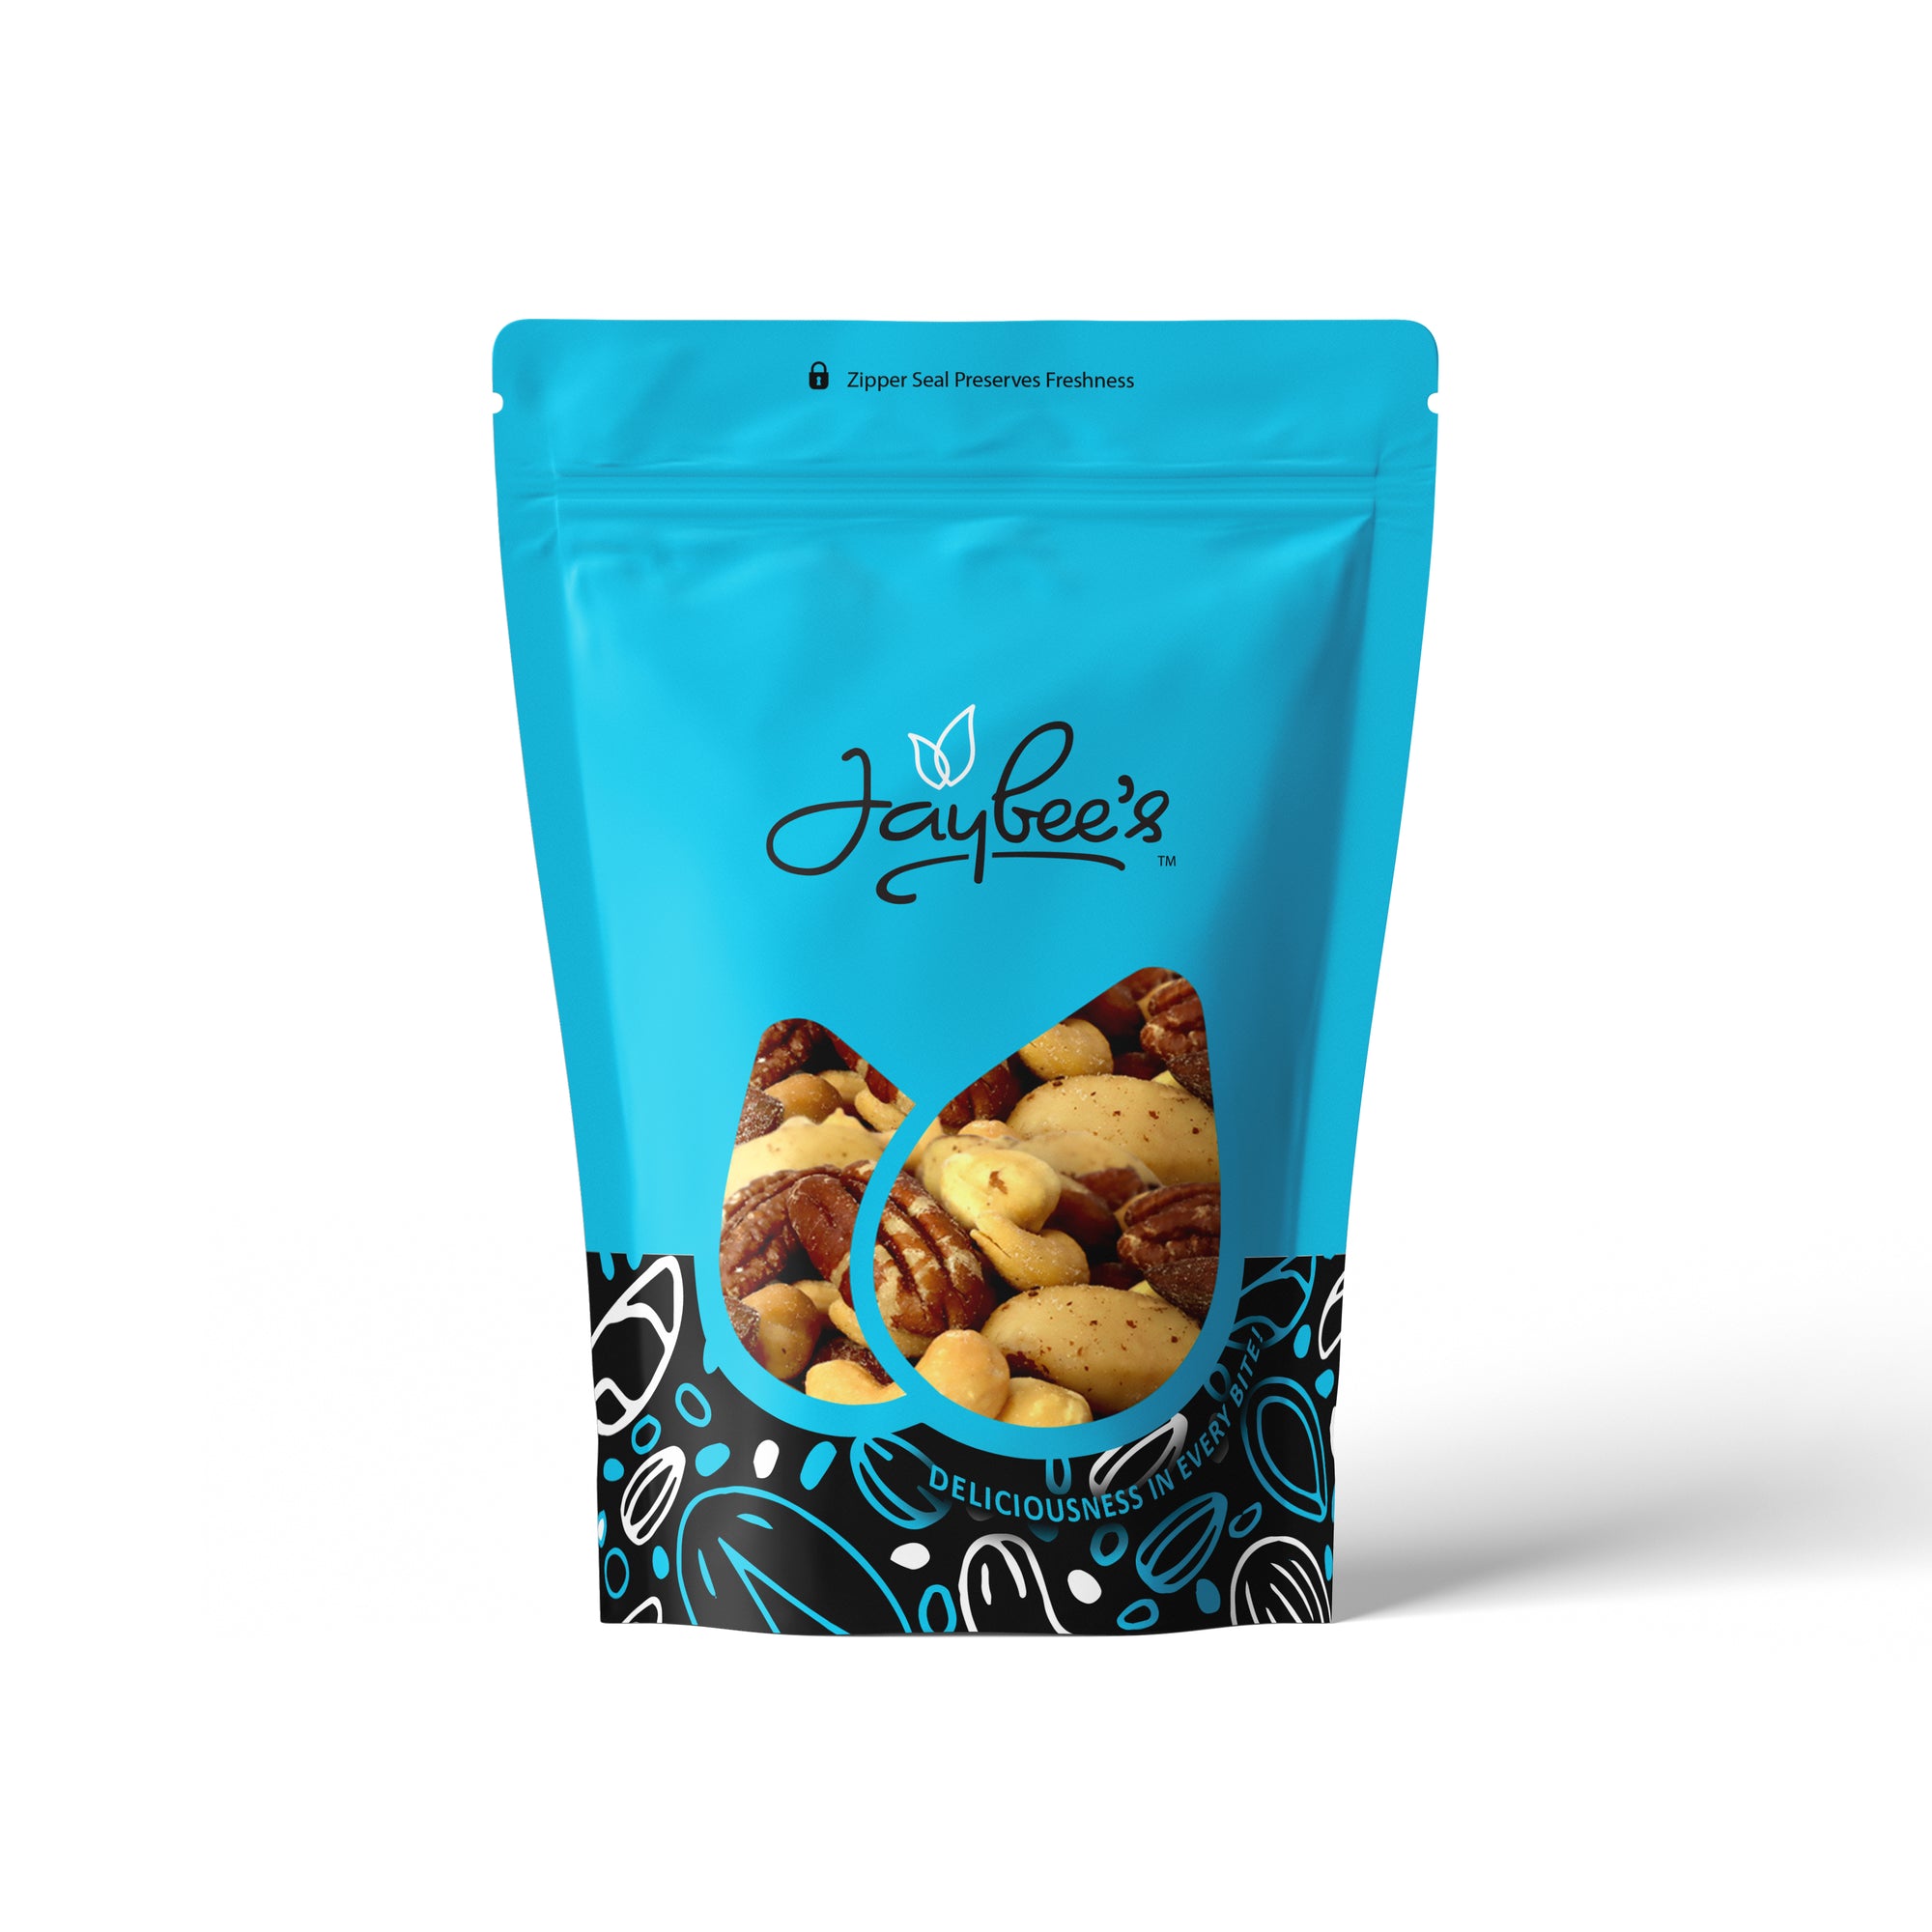 Deluxe Mixed Nuts - Roasted & Unsalted